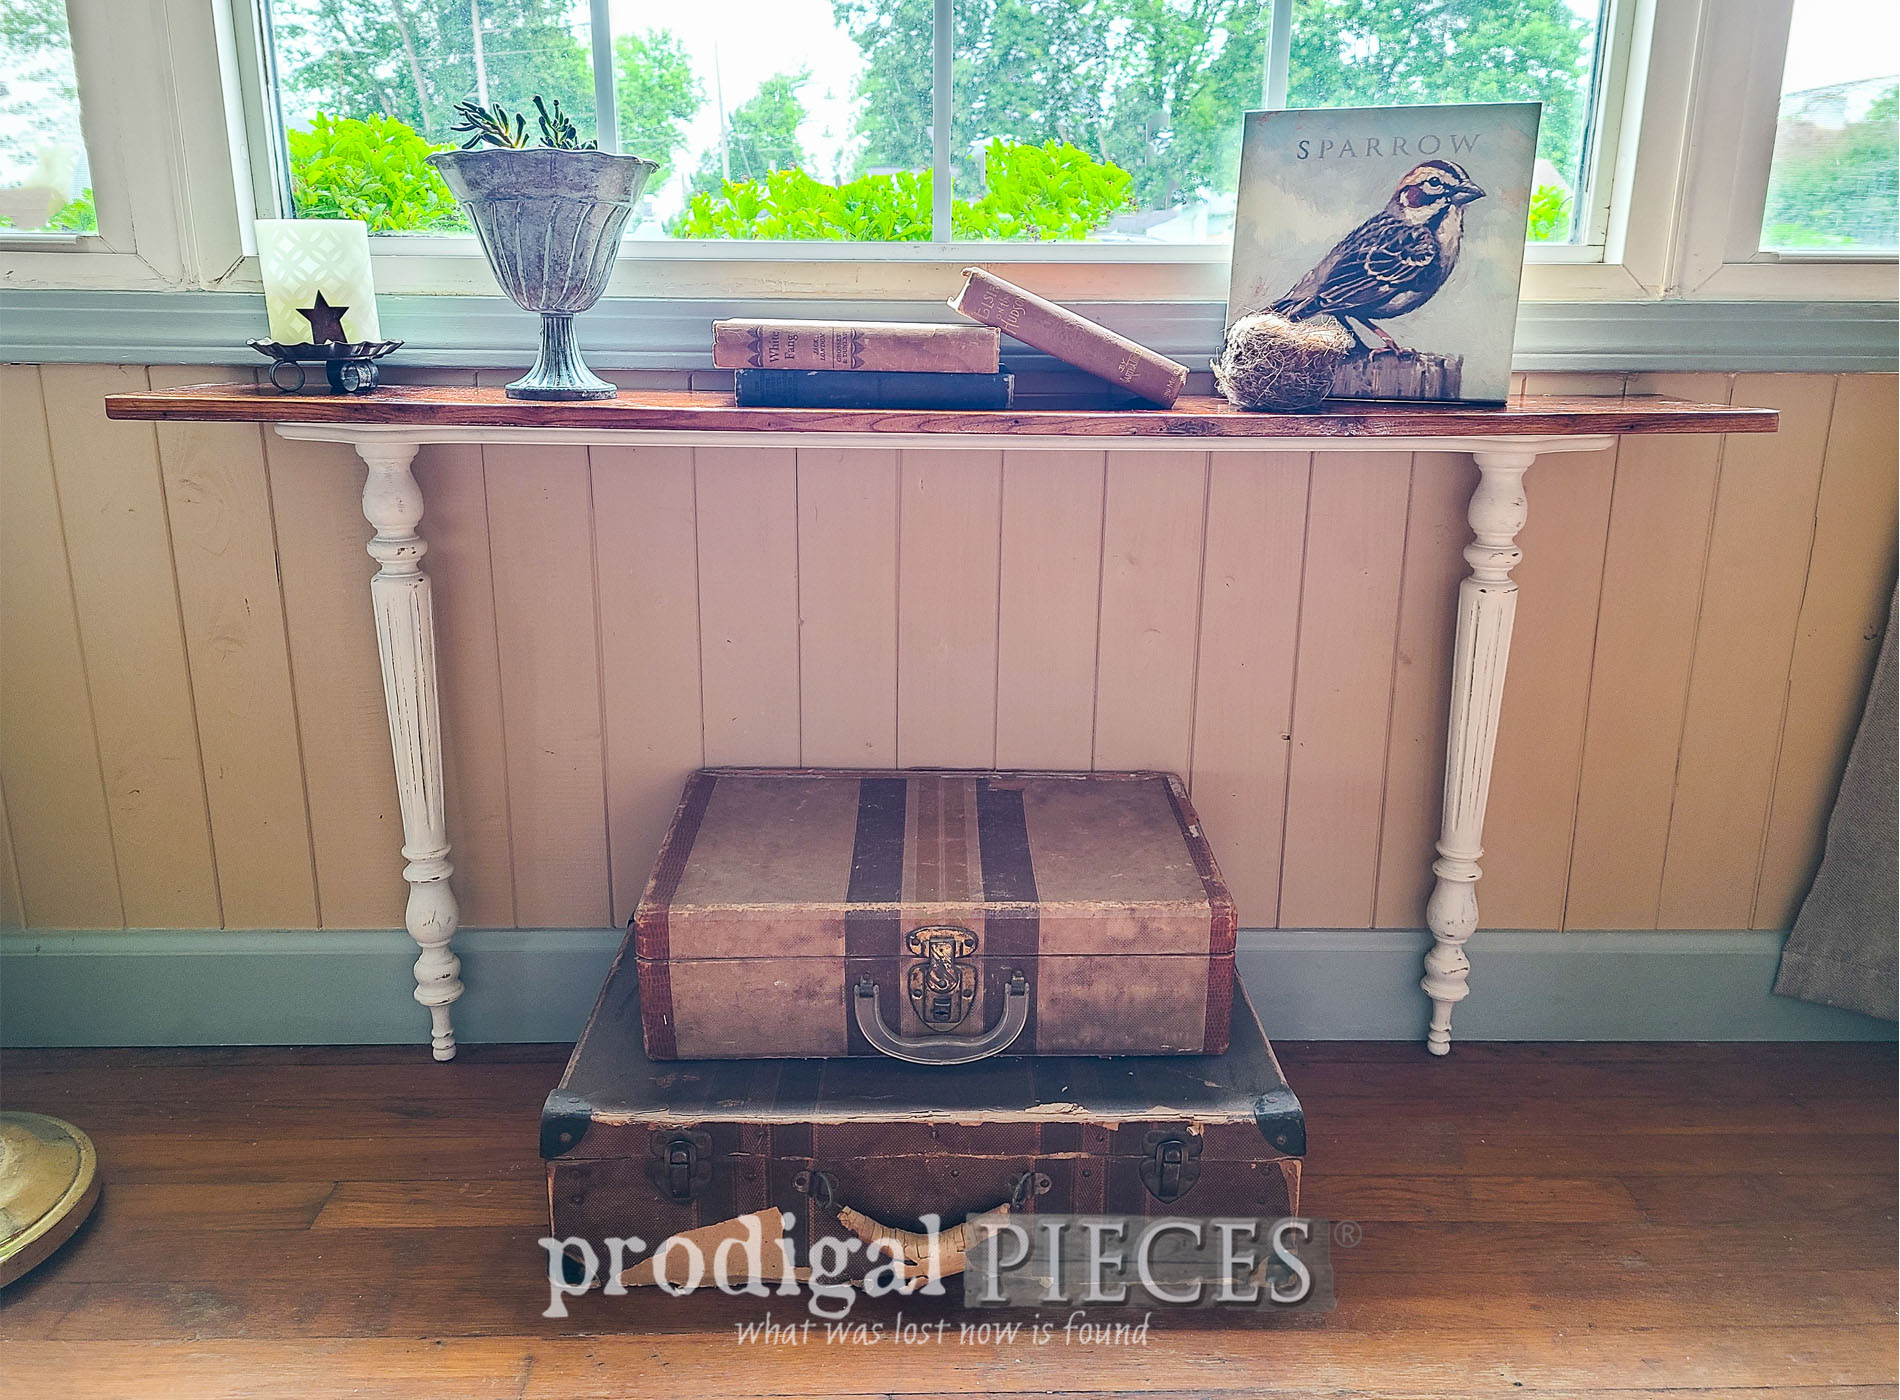 Featured Repurposed Mirror Harp Table Shelf by Larissa of Prodigal Pieces | prodigalpieces.com #prodigalpieces #repurposed #diy